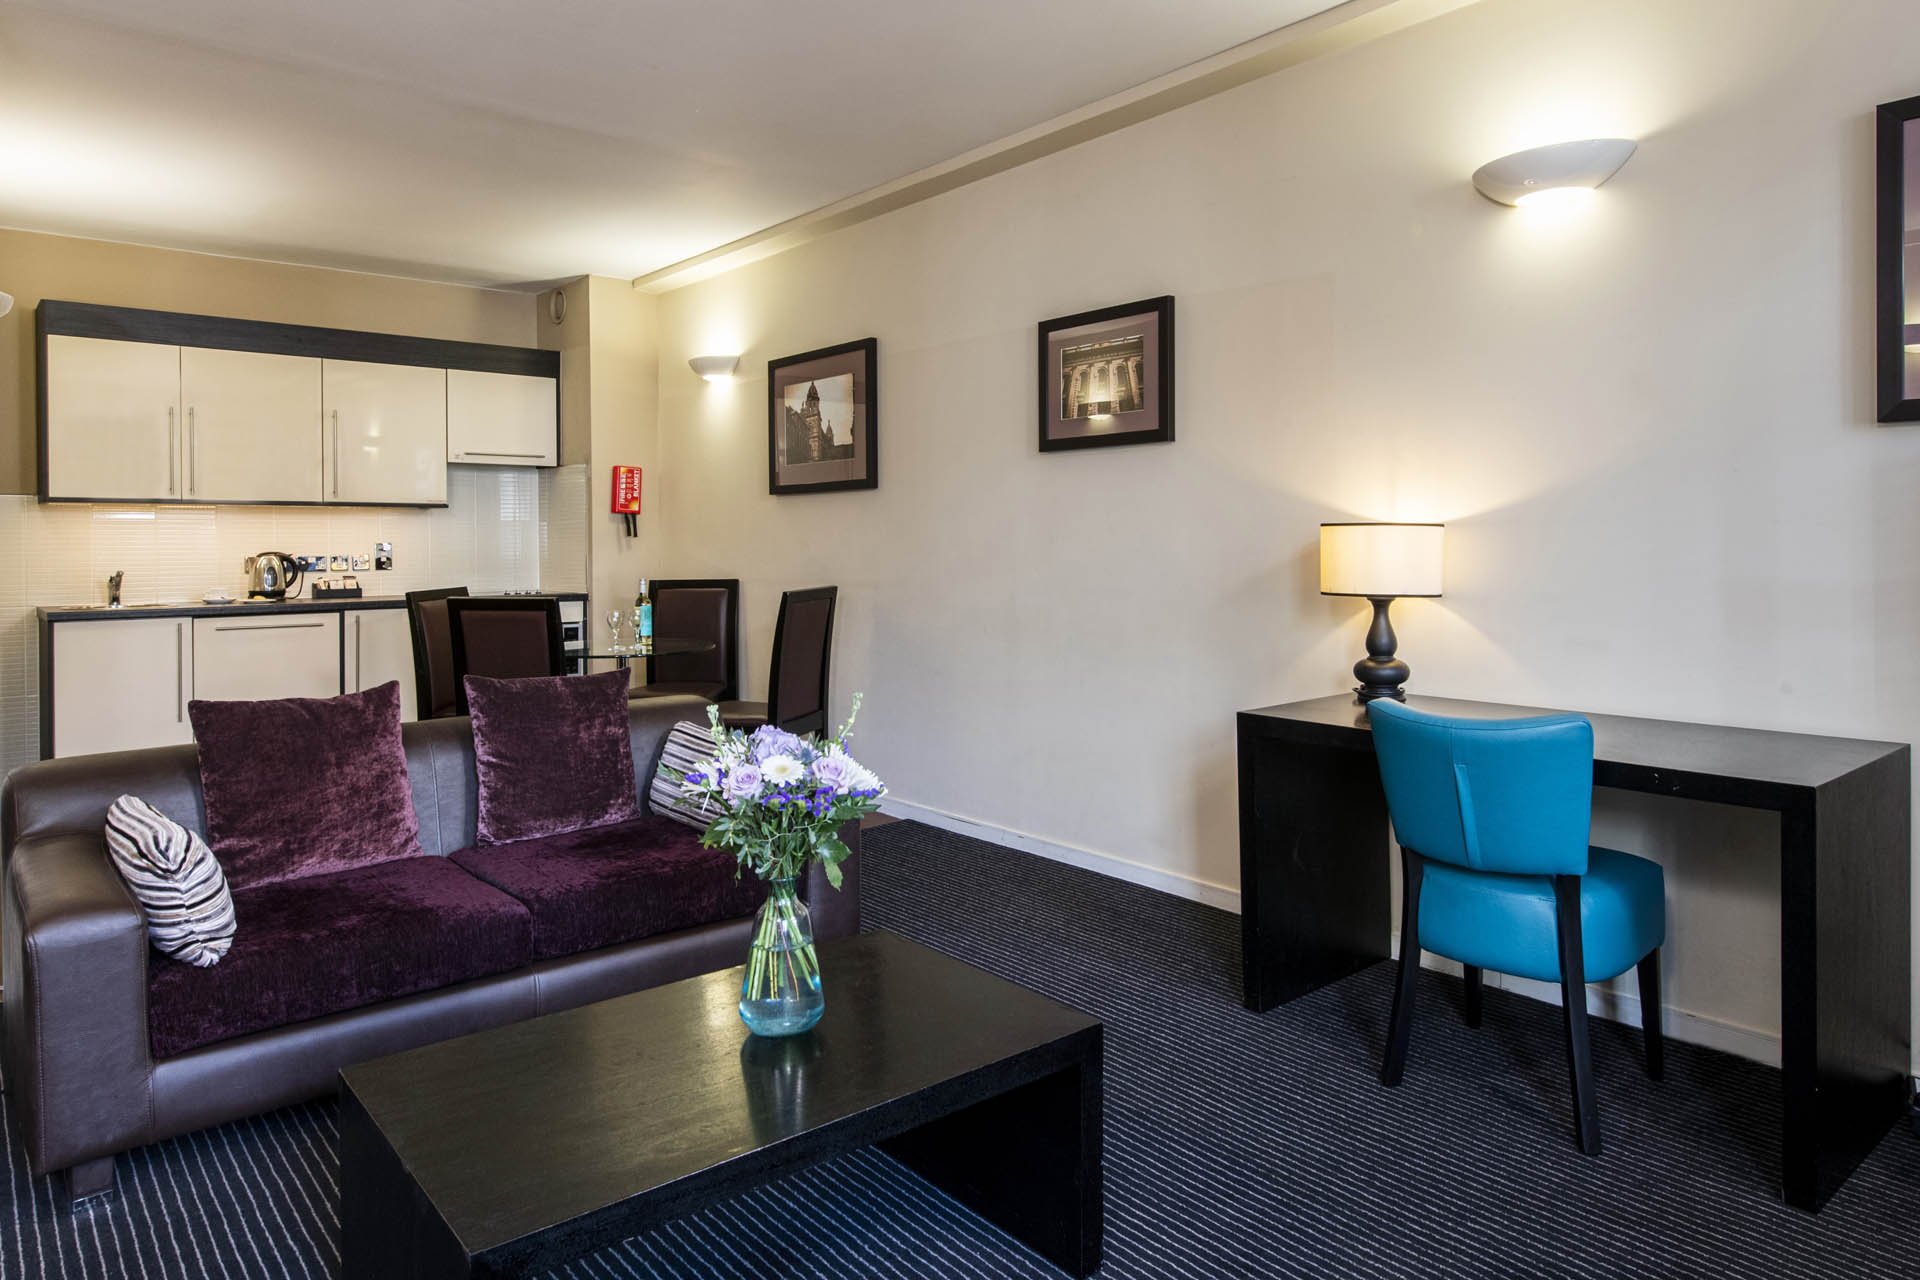 2 bedroom deluxe serviced apartments flat glasgow